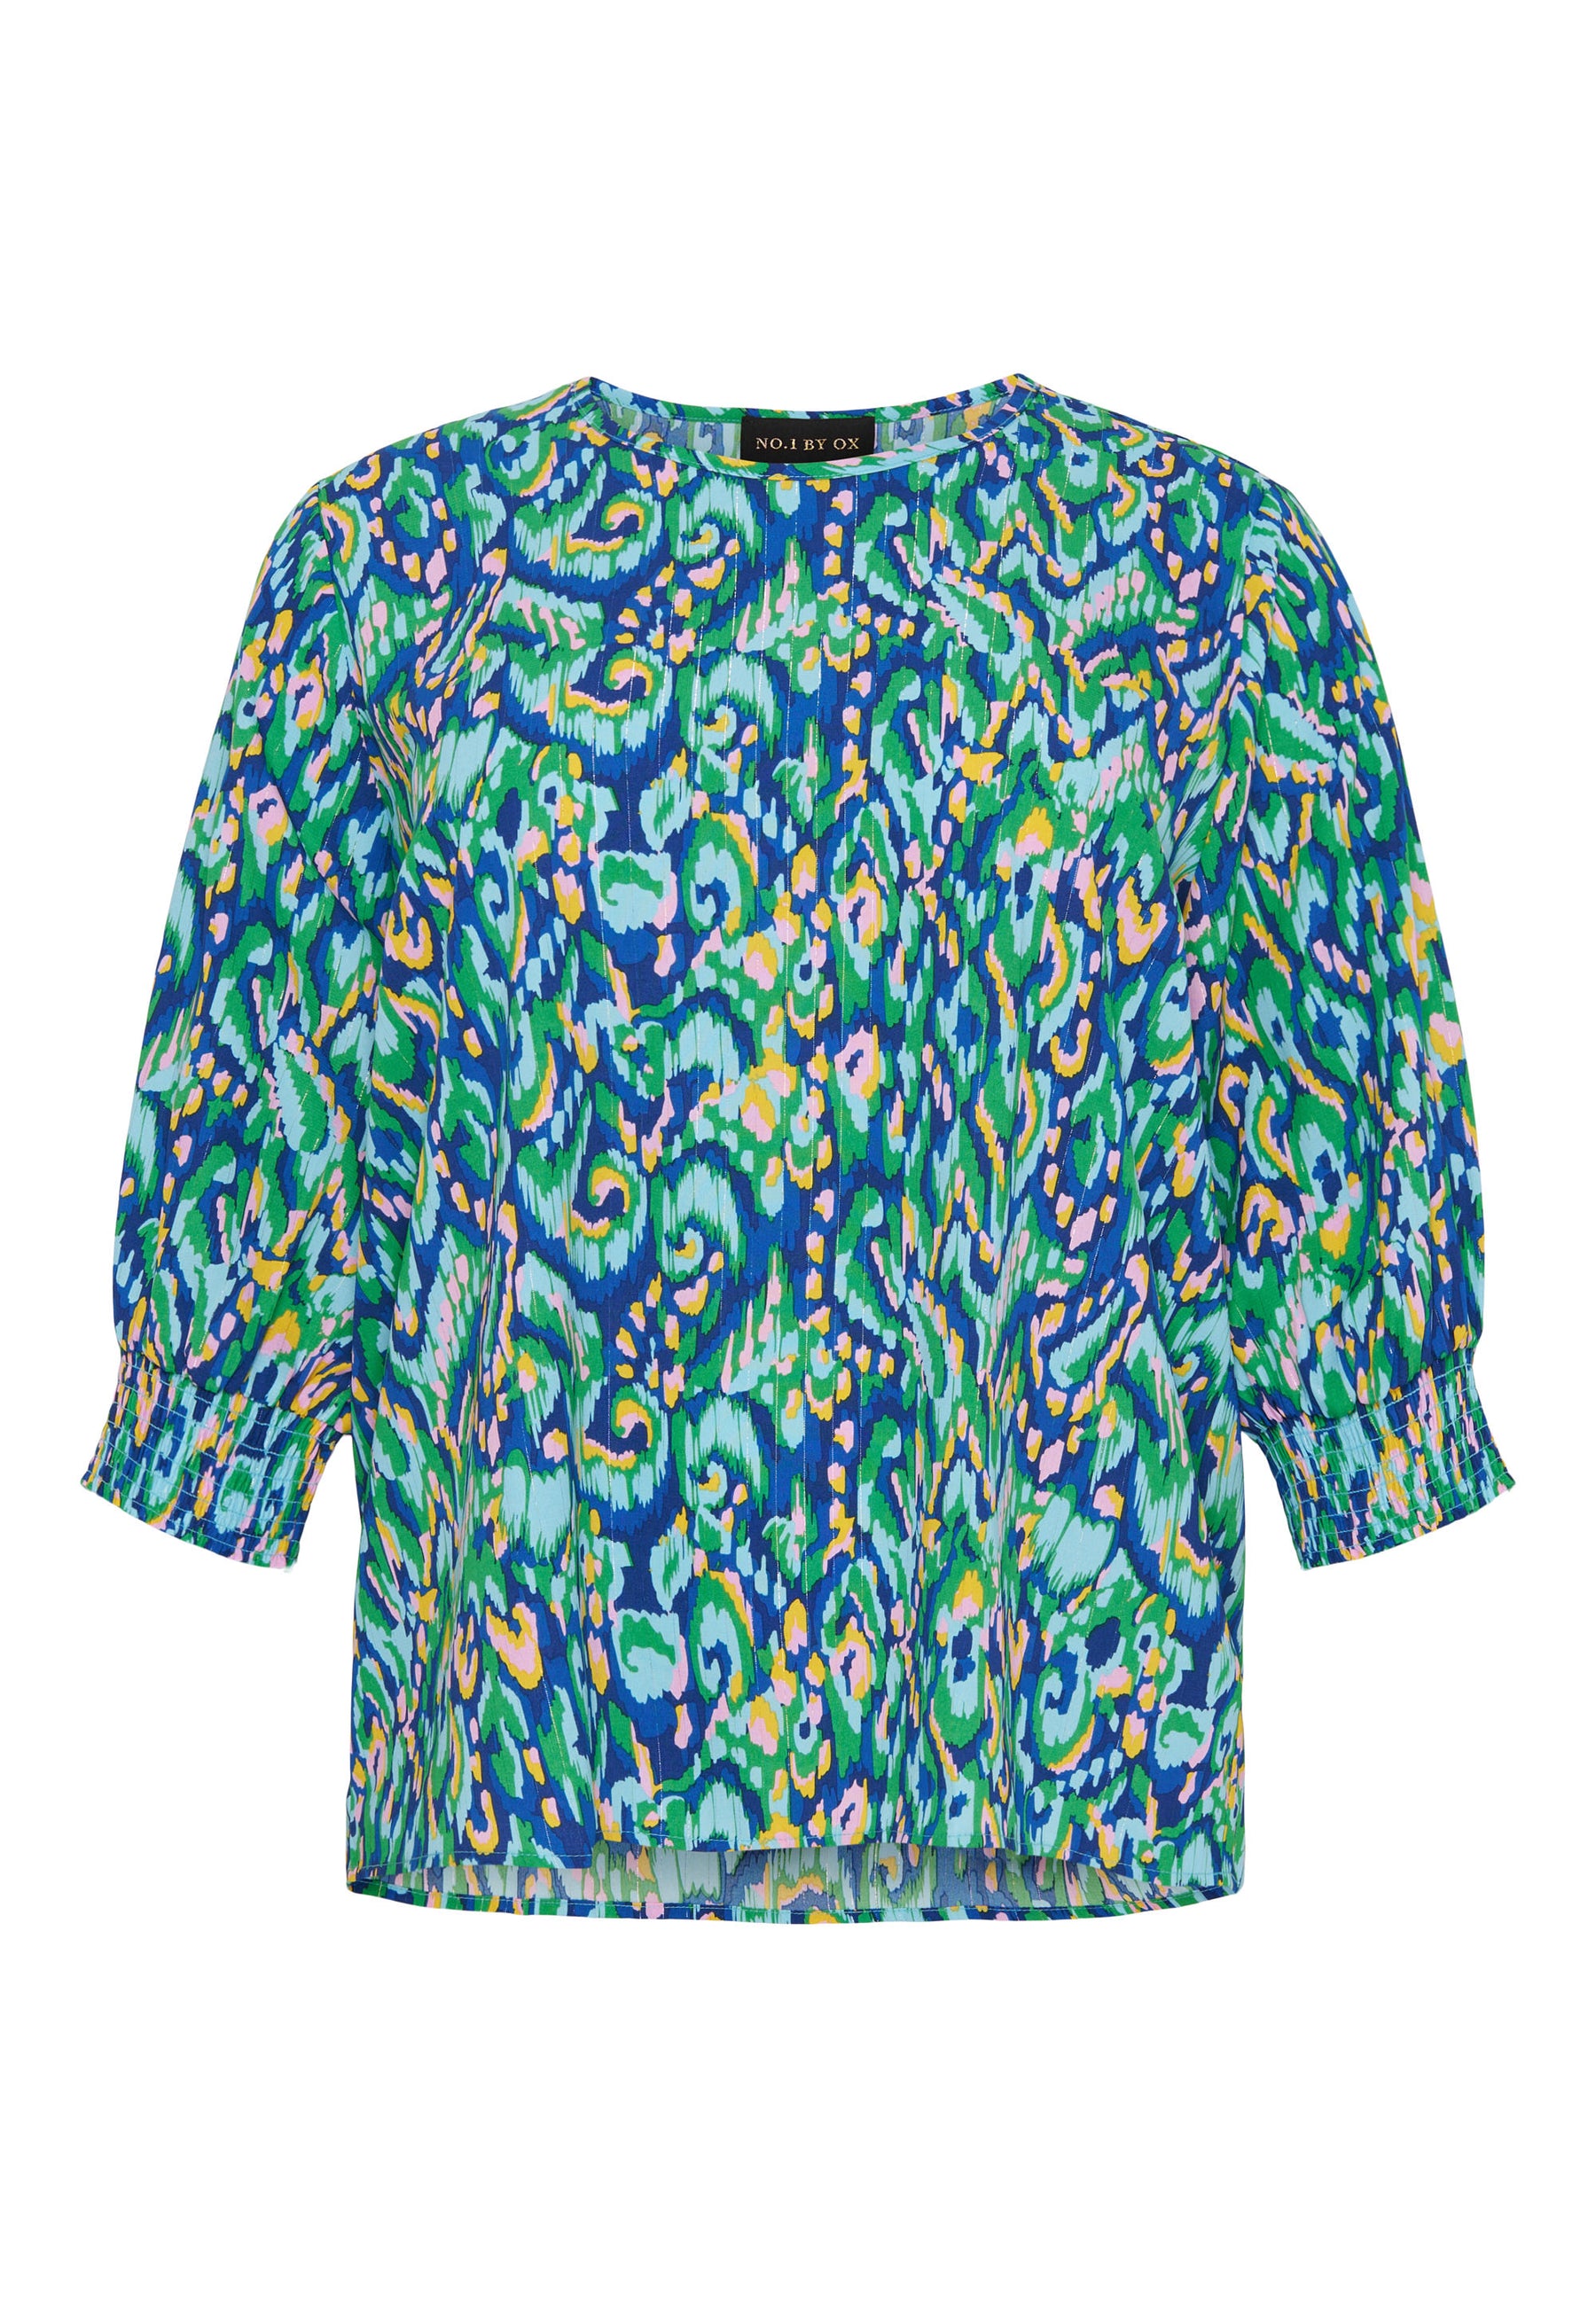 NO. 1 BY OX Blouse w 1/2 Sleeves and smock Cuffs Bluser Blue w Spring Green and Rose Pink graphic Print